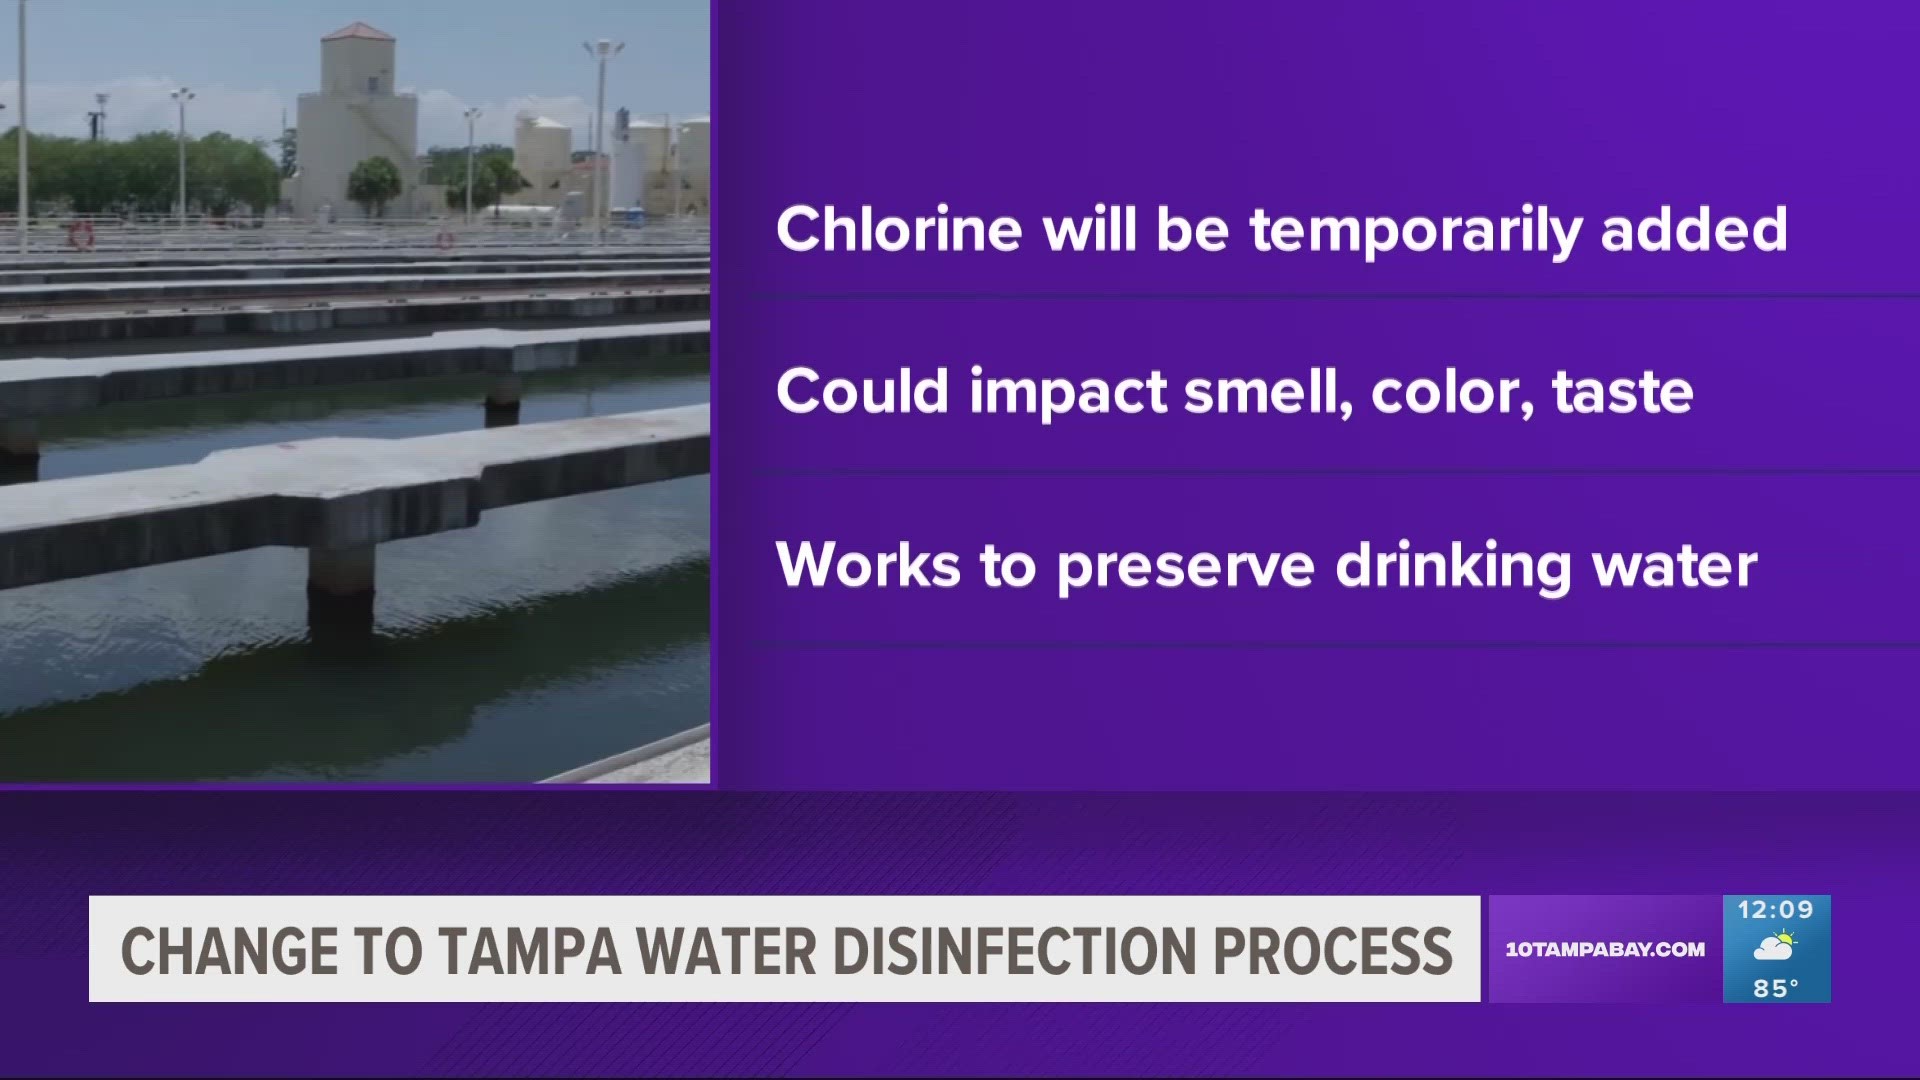 The city temporarily made some changes to its water disinfection process.